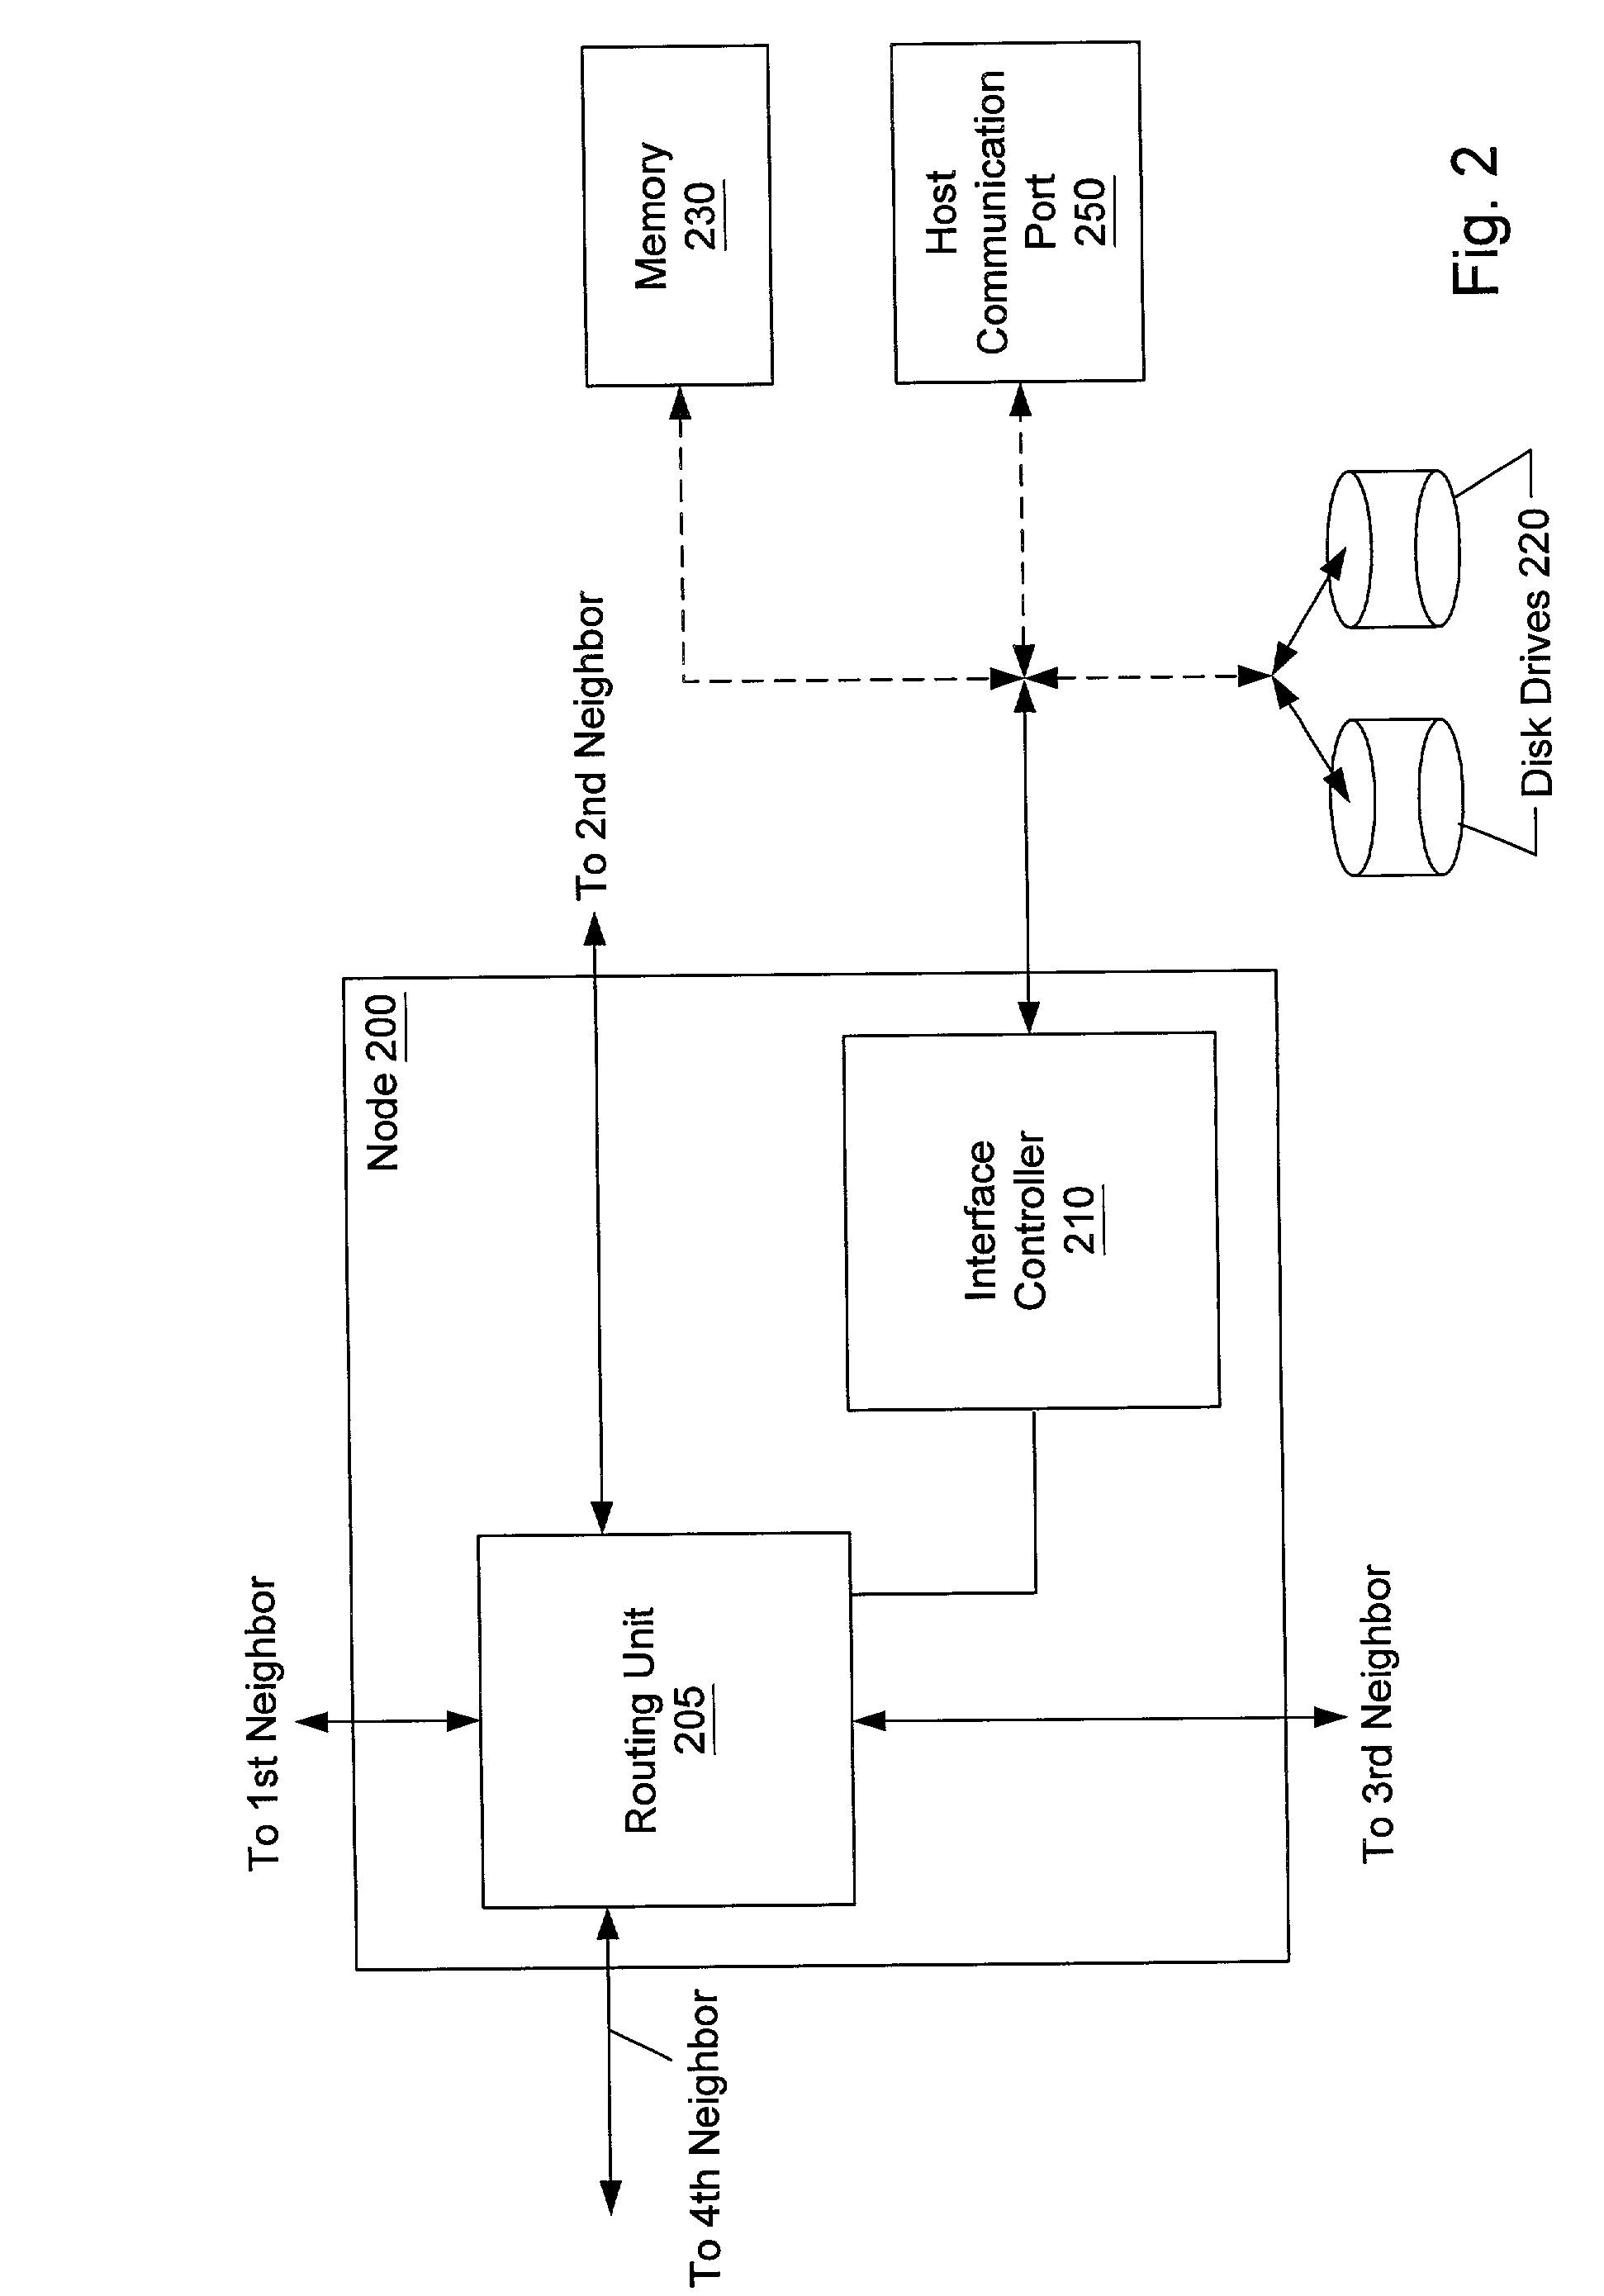 Fault-tolerant routing scheme for a multi-path interconnection fabric in a storage network